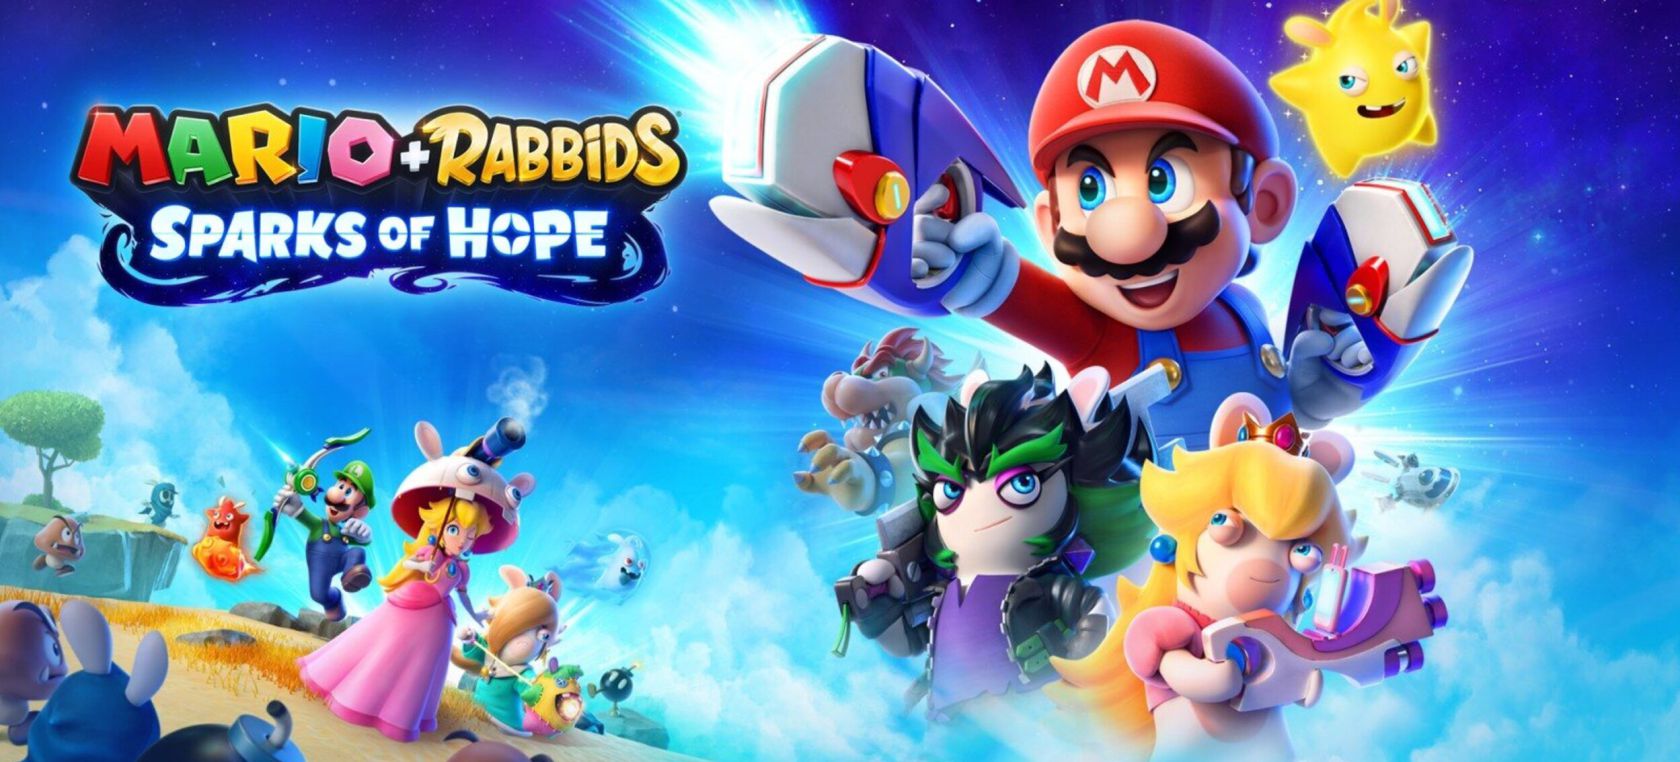 Mario Rabbids Sparks of Hope